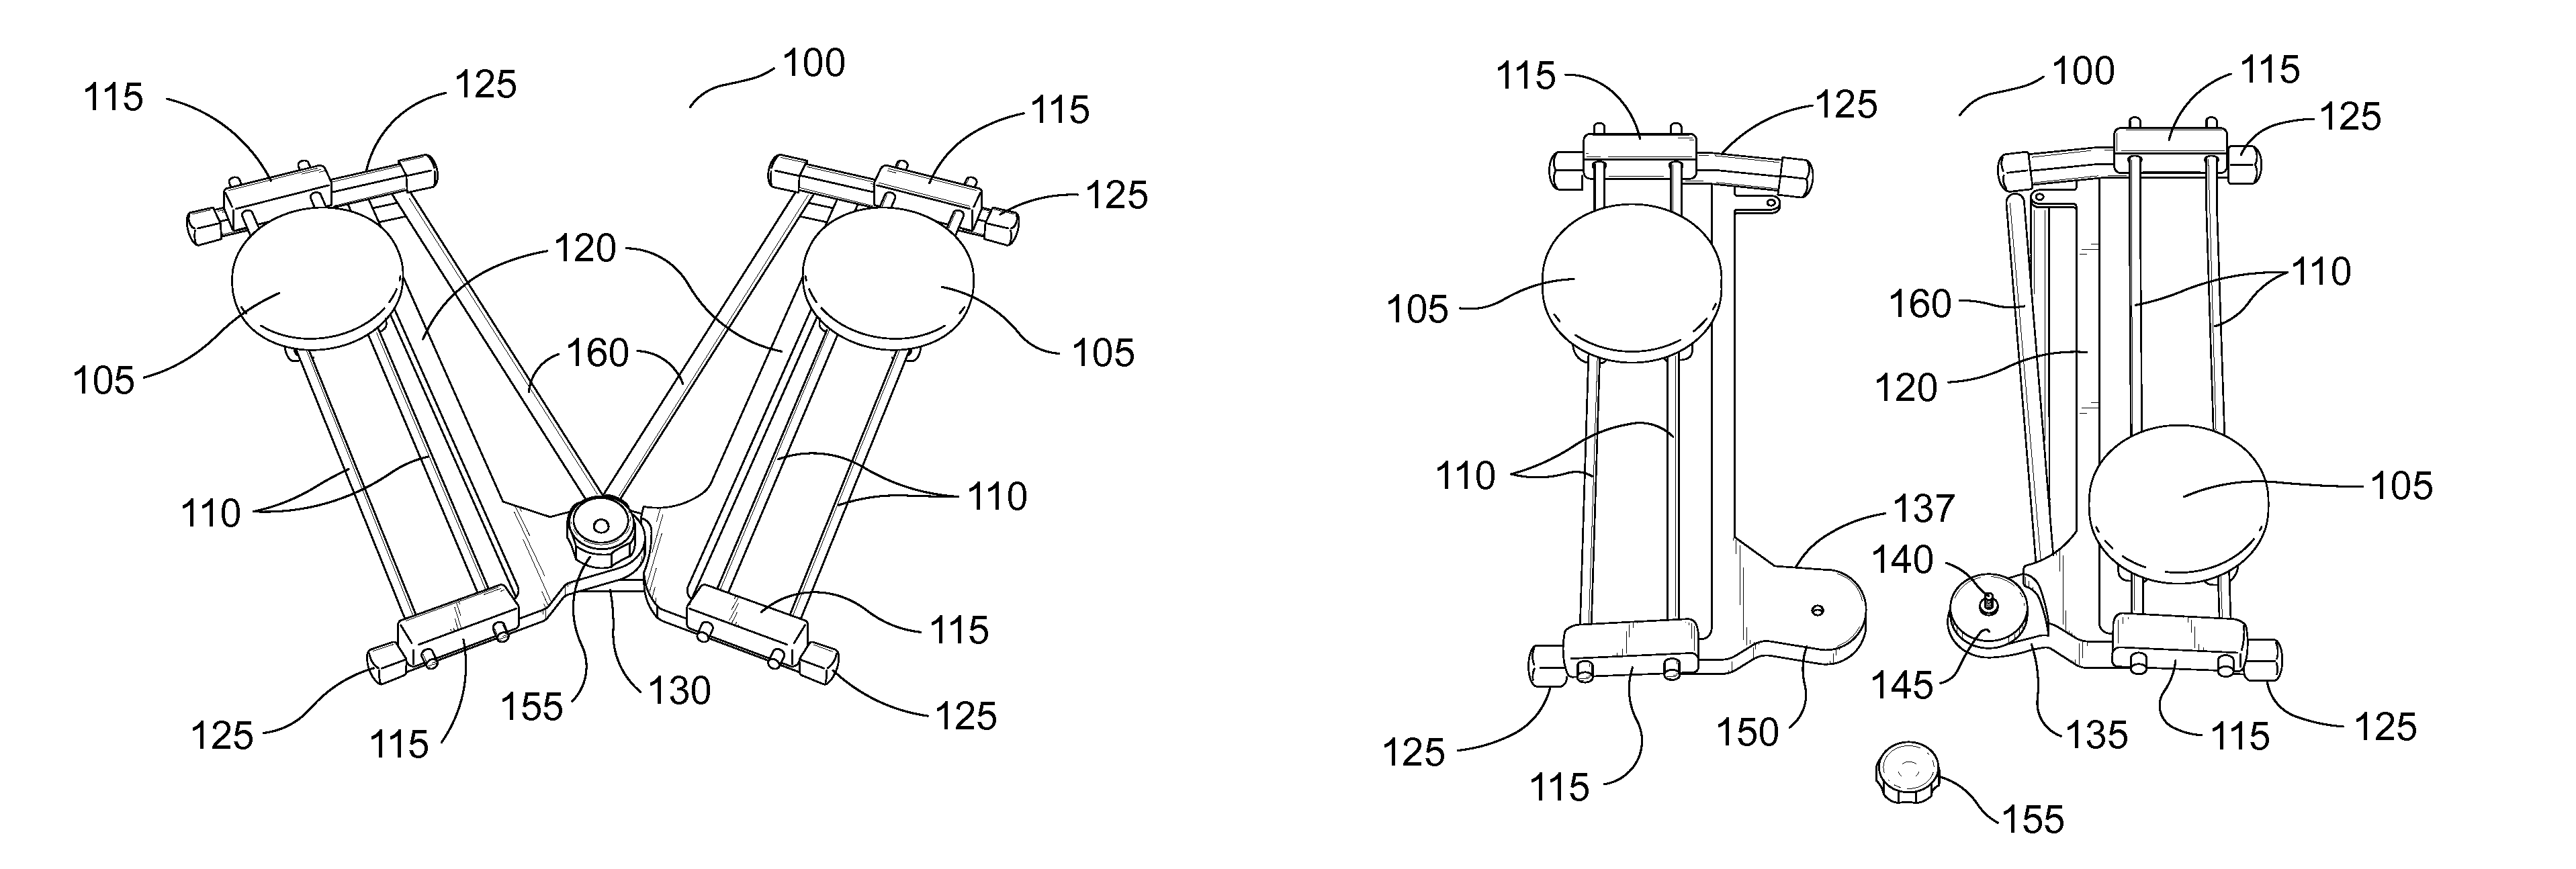 Apparatus for aerobic leg exercise of a seated user